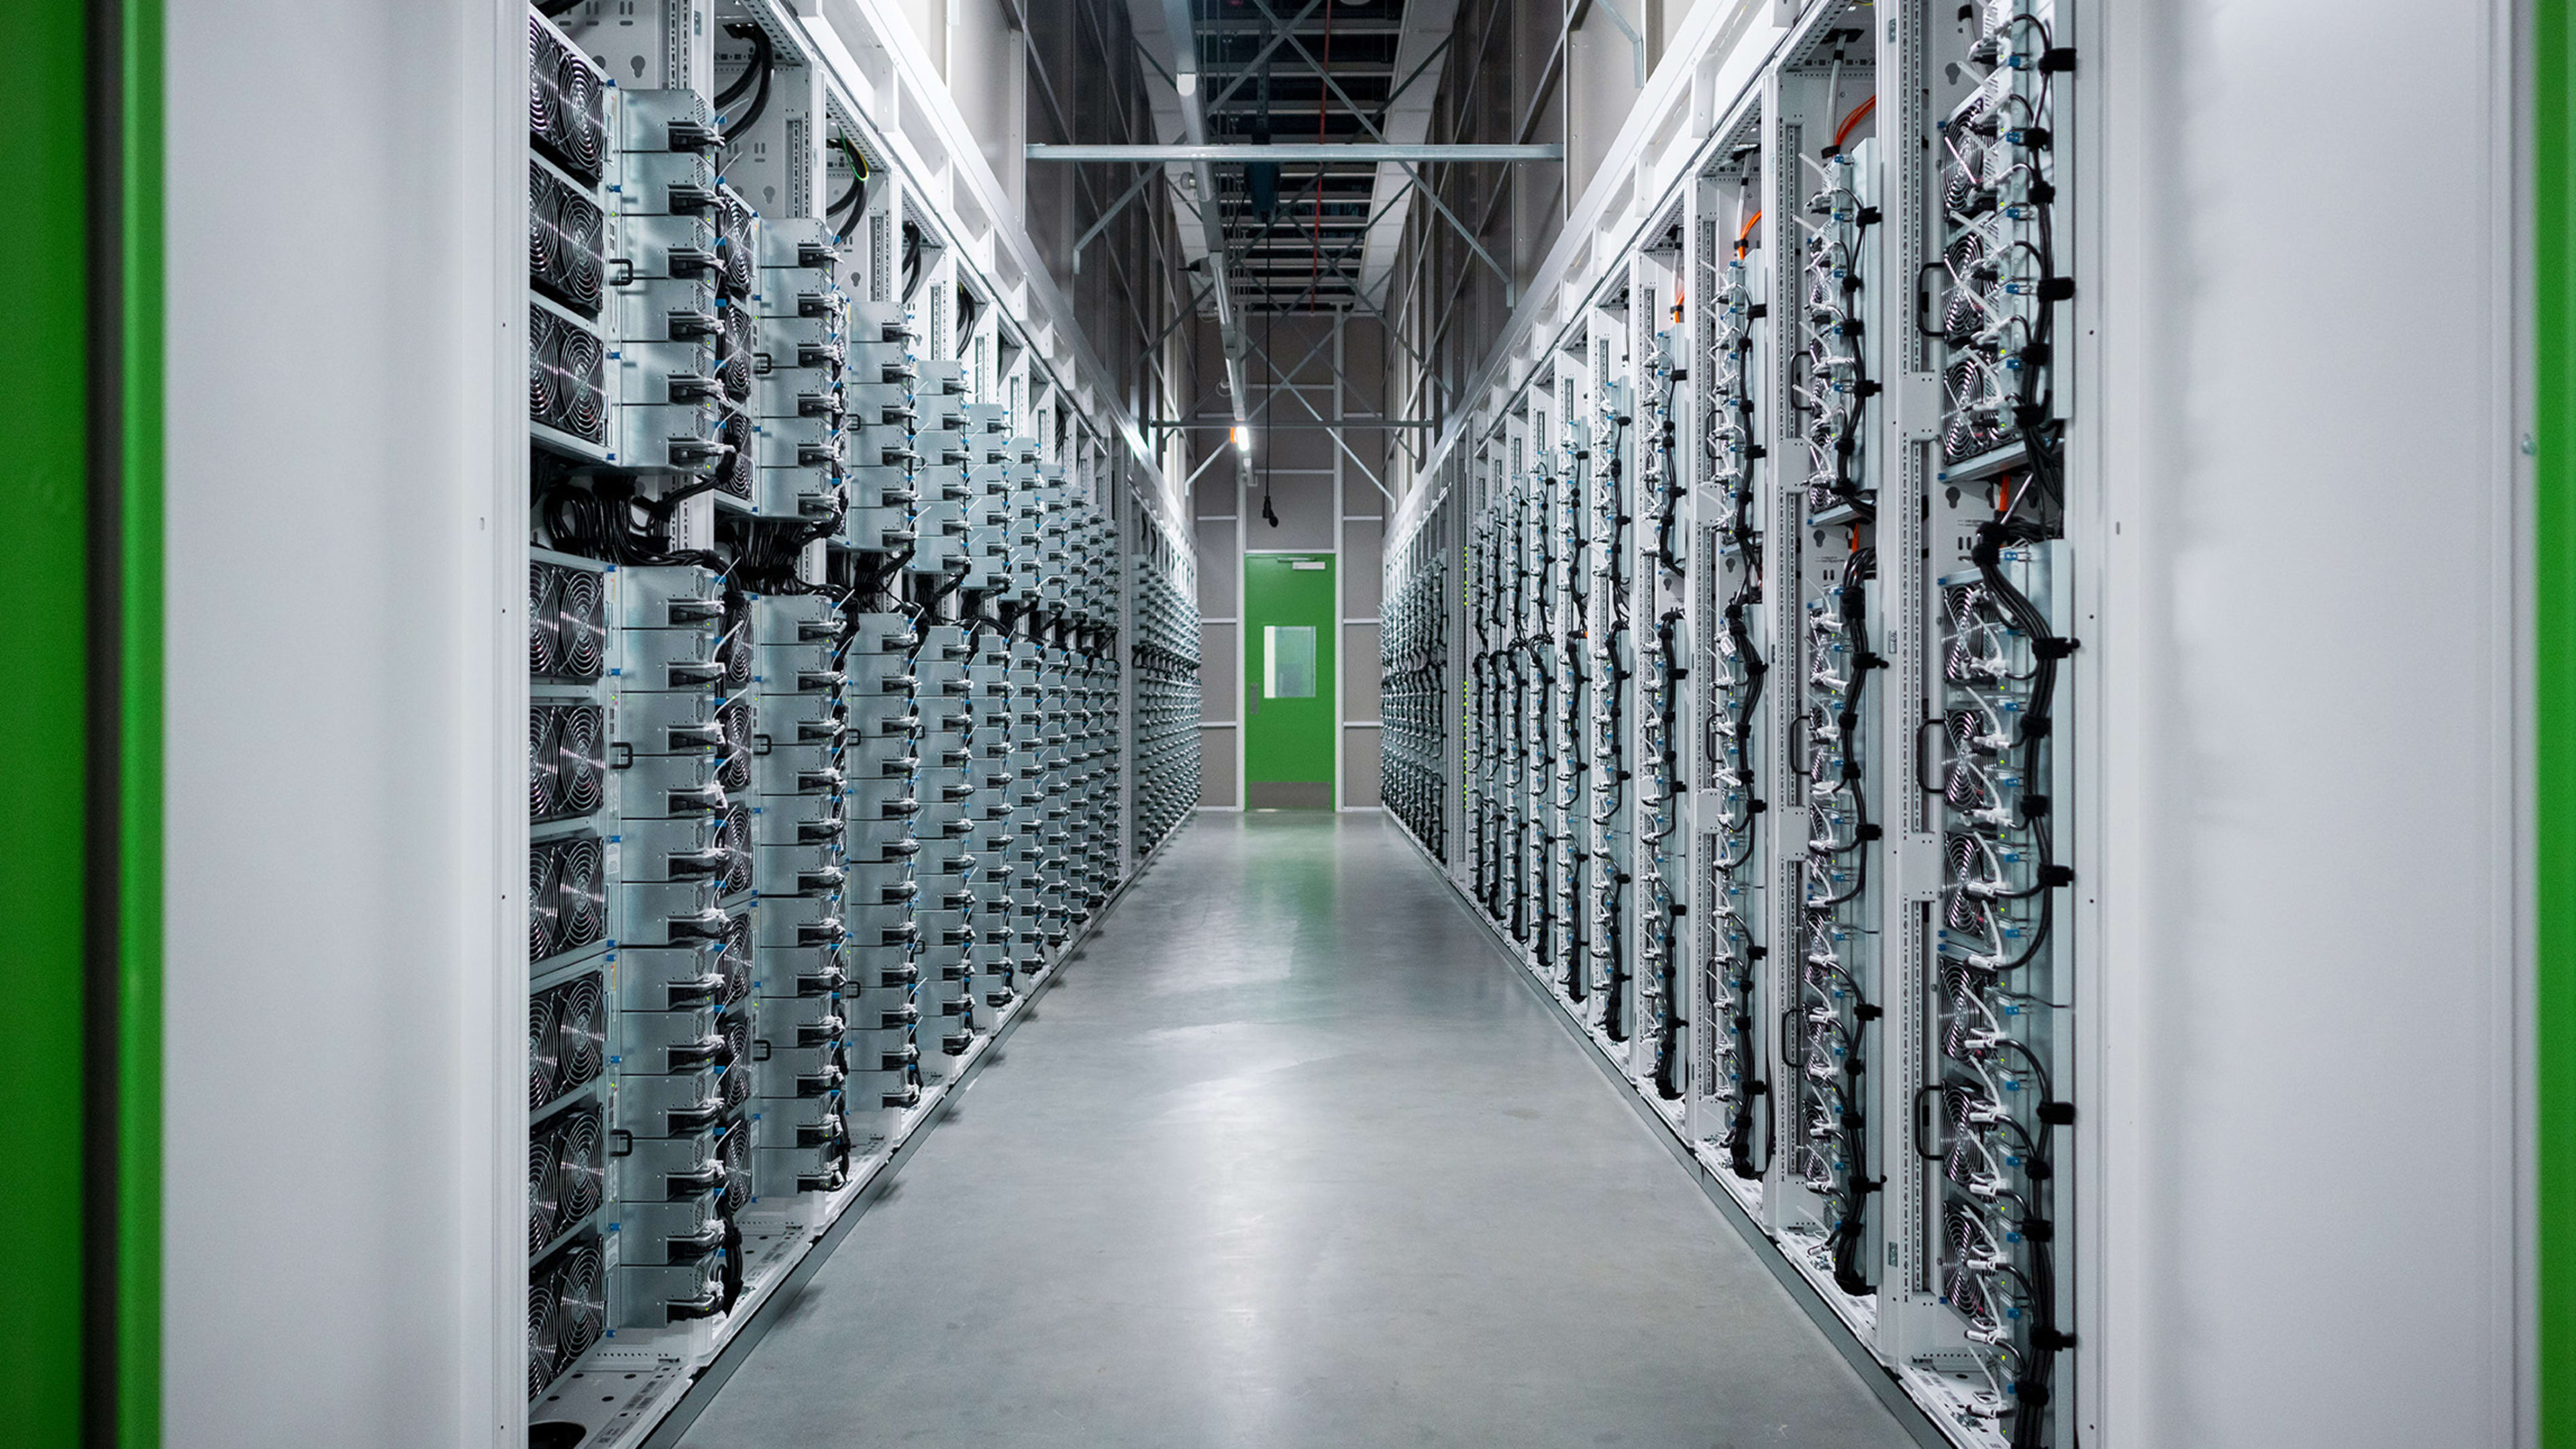 The data center of the future is made of algae bricks and runs on hydrogen fuel cells